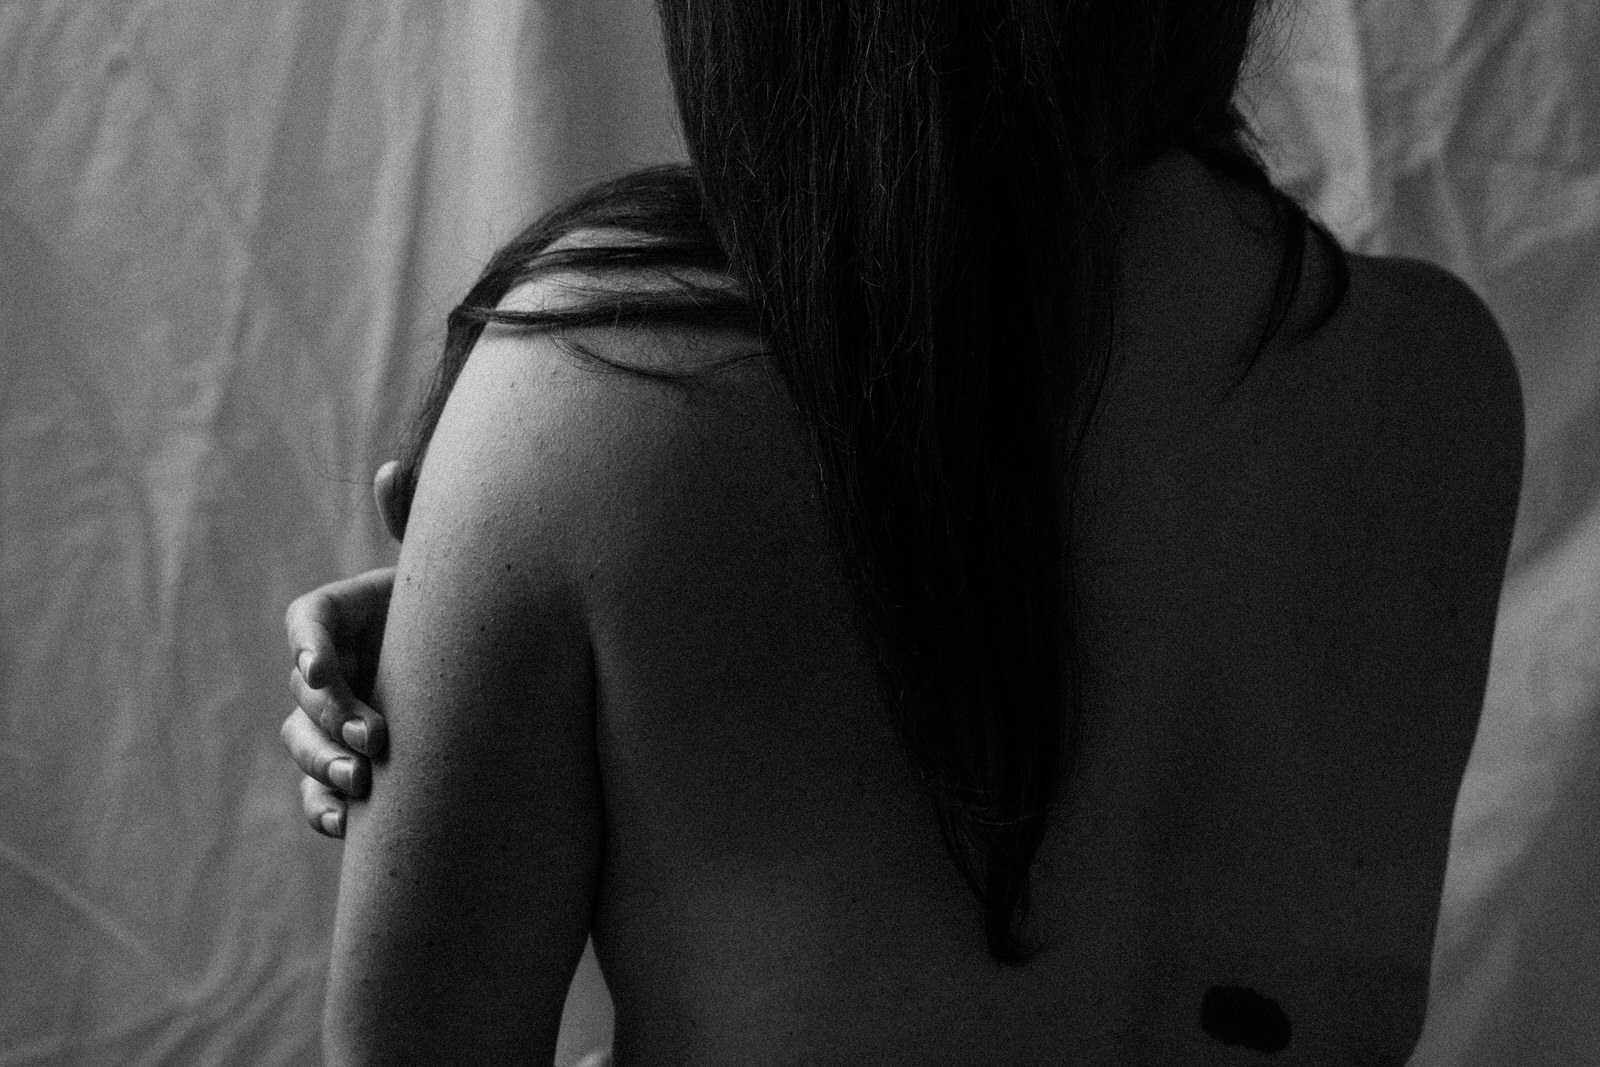 fine art nude image of woman's back, hair falling down back and hand on her arm